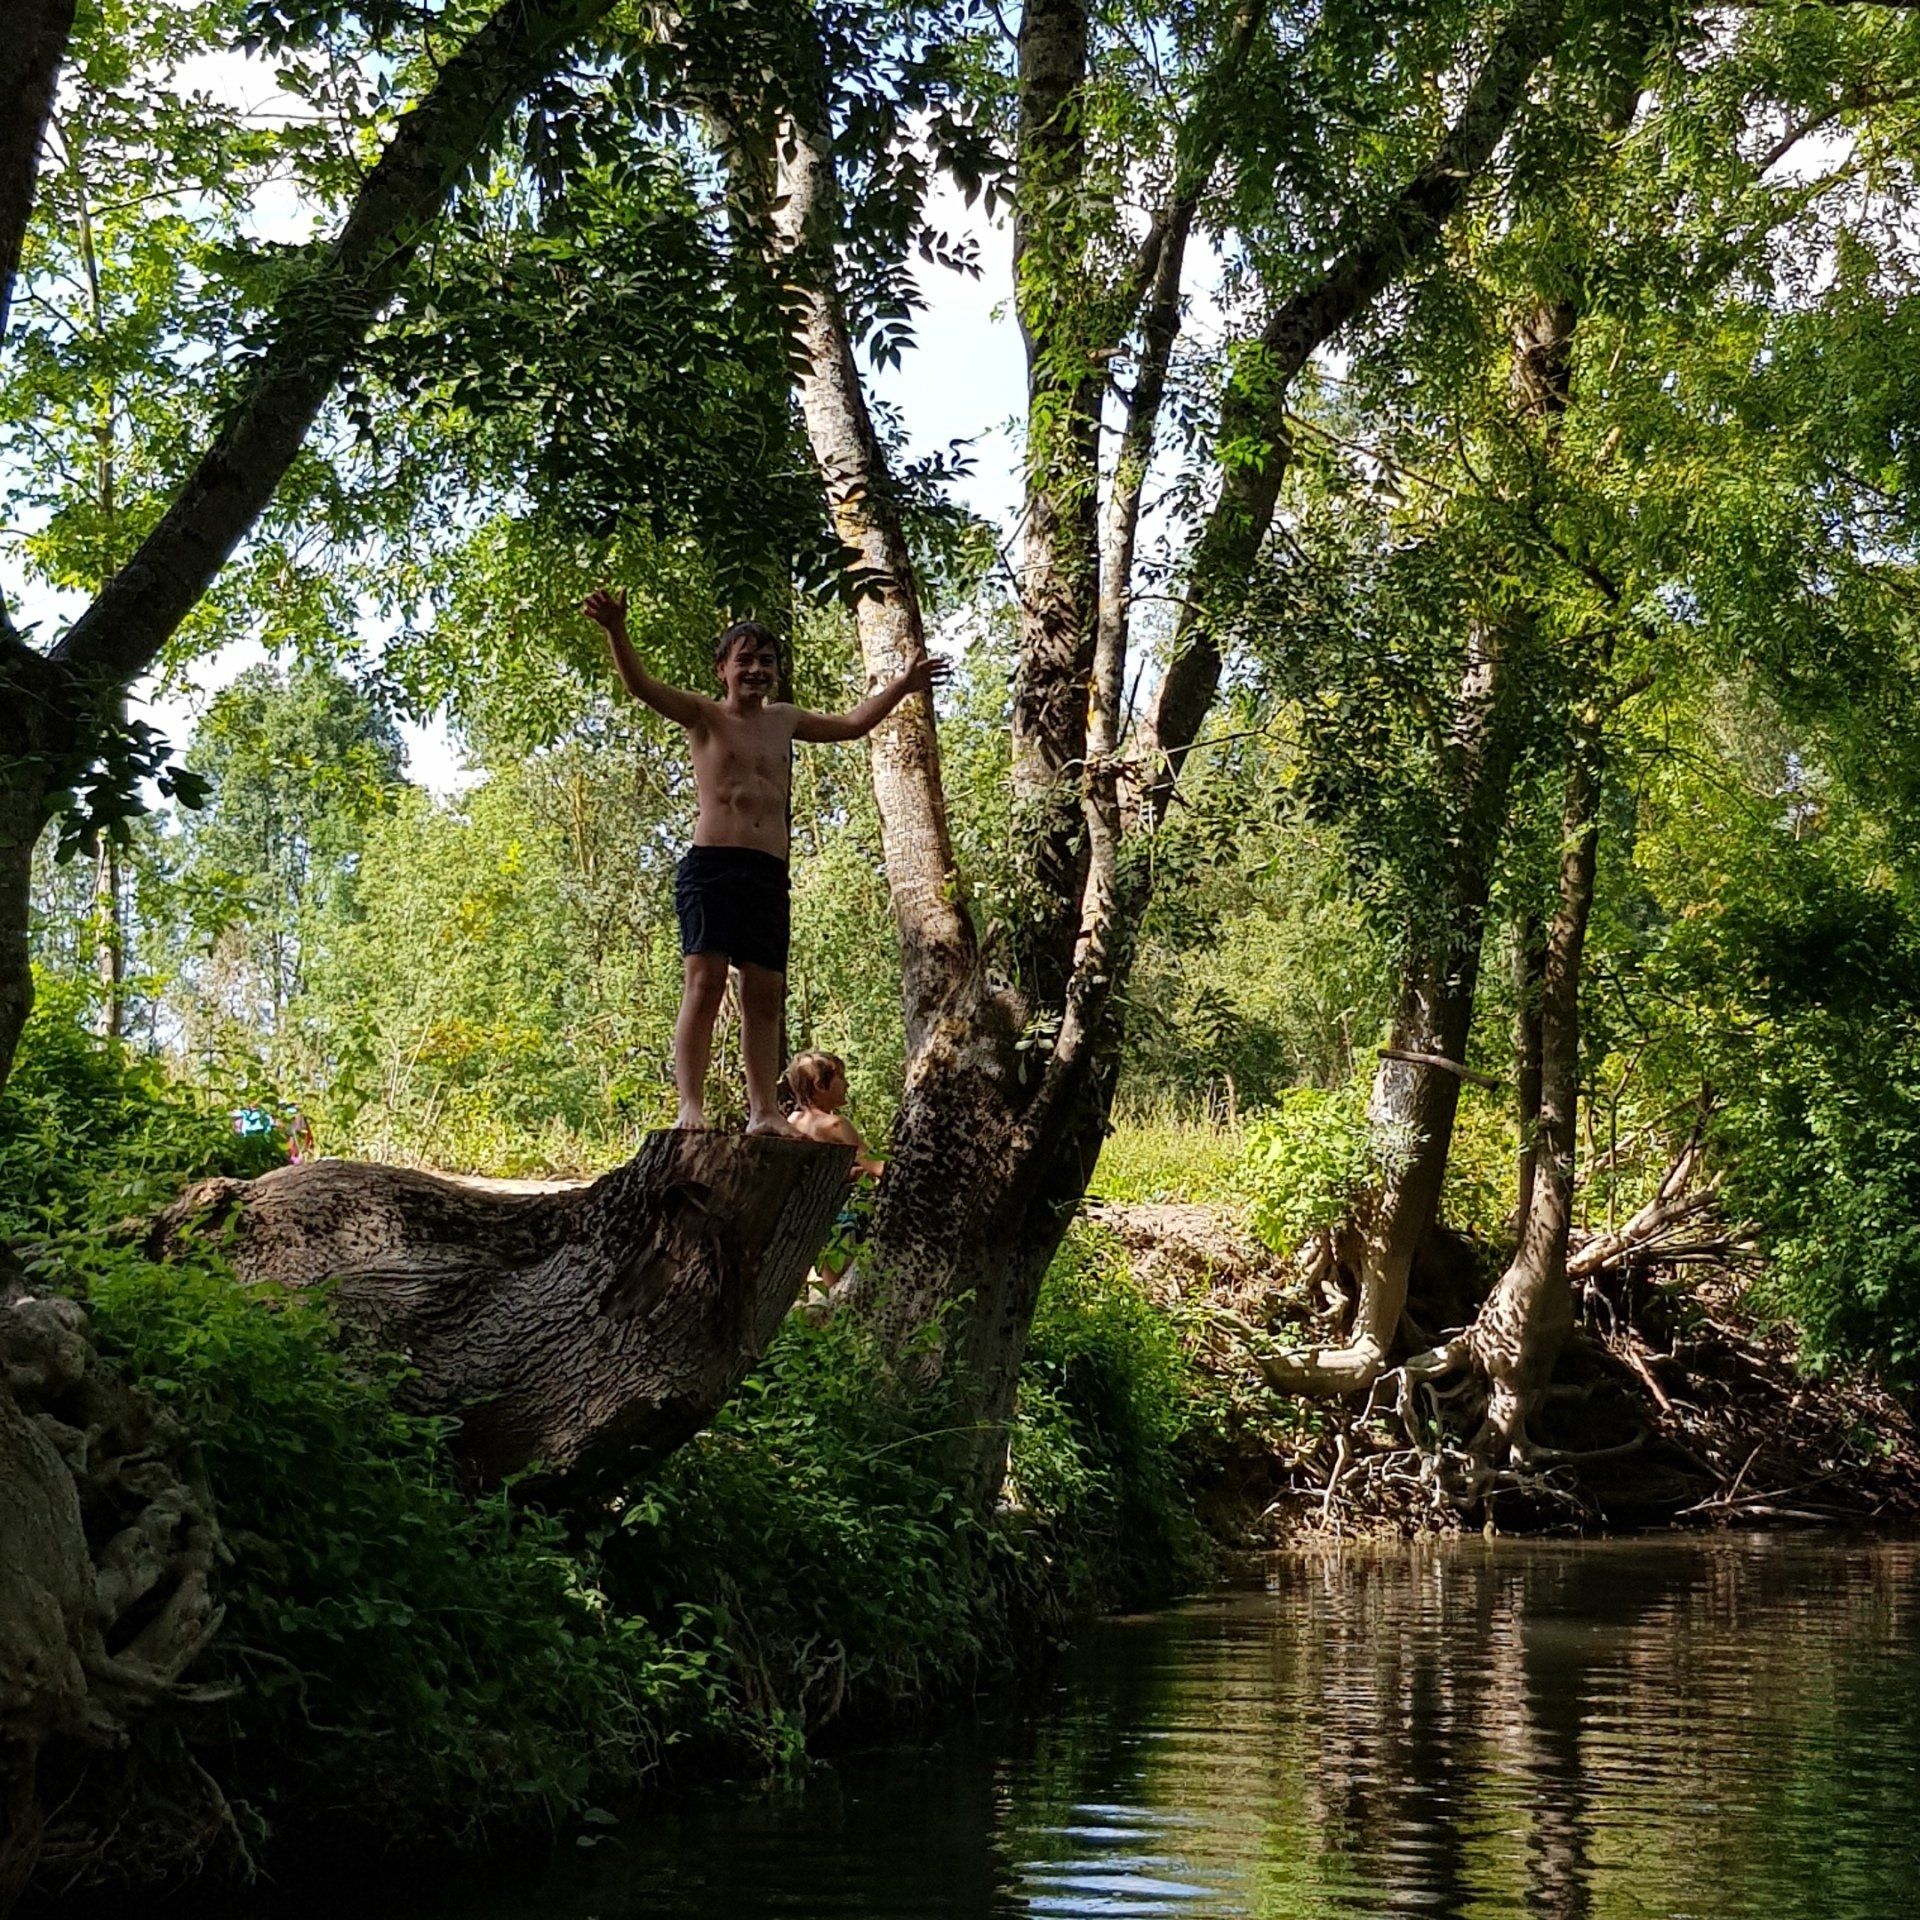 boy about to jump into river from tree stump